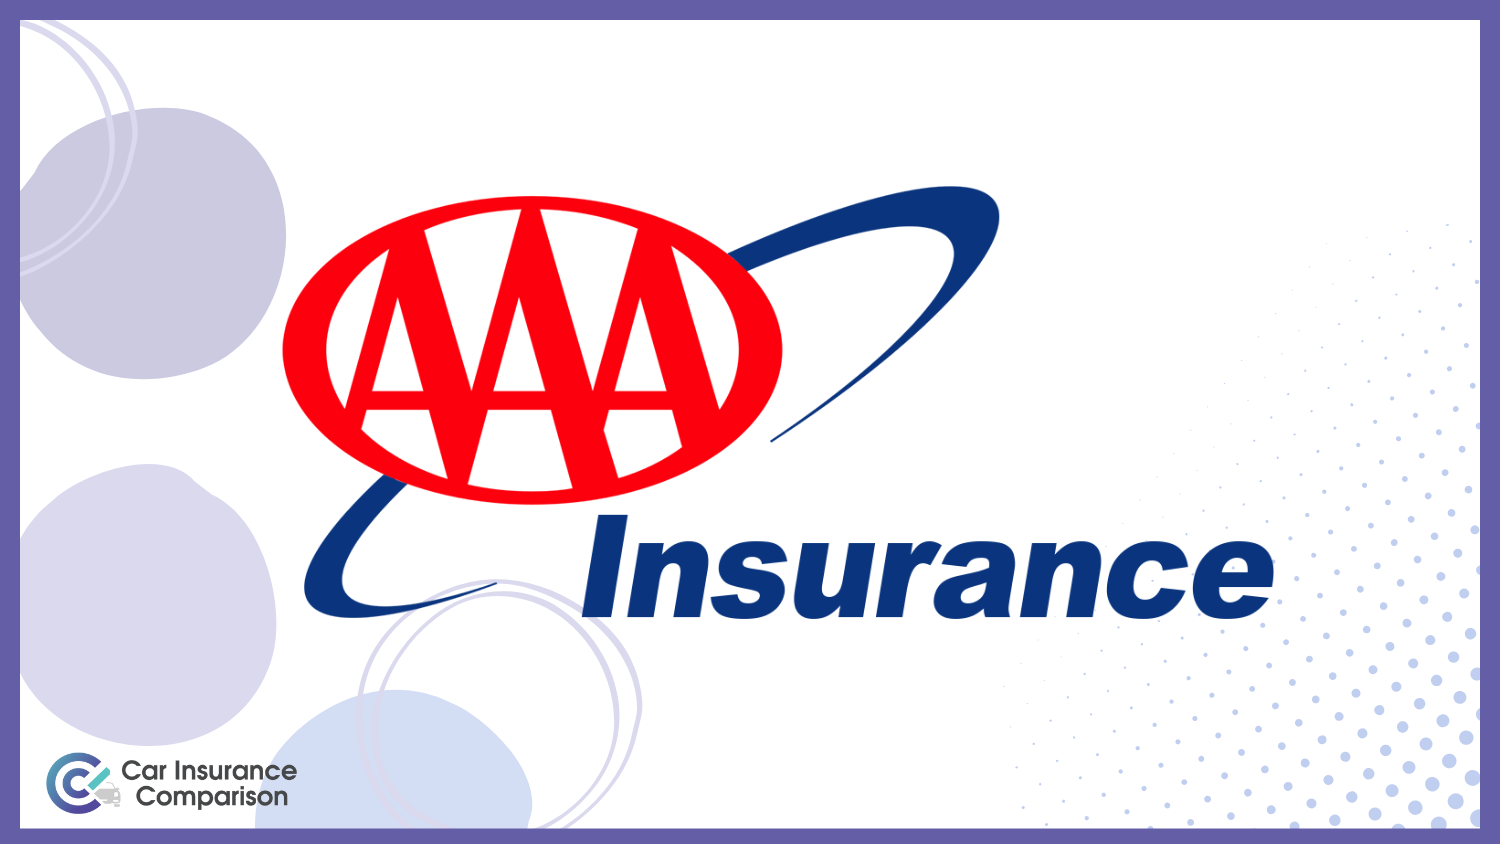 AAA: Cheap Car Insurance for Leased Cars